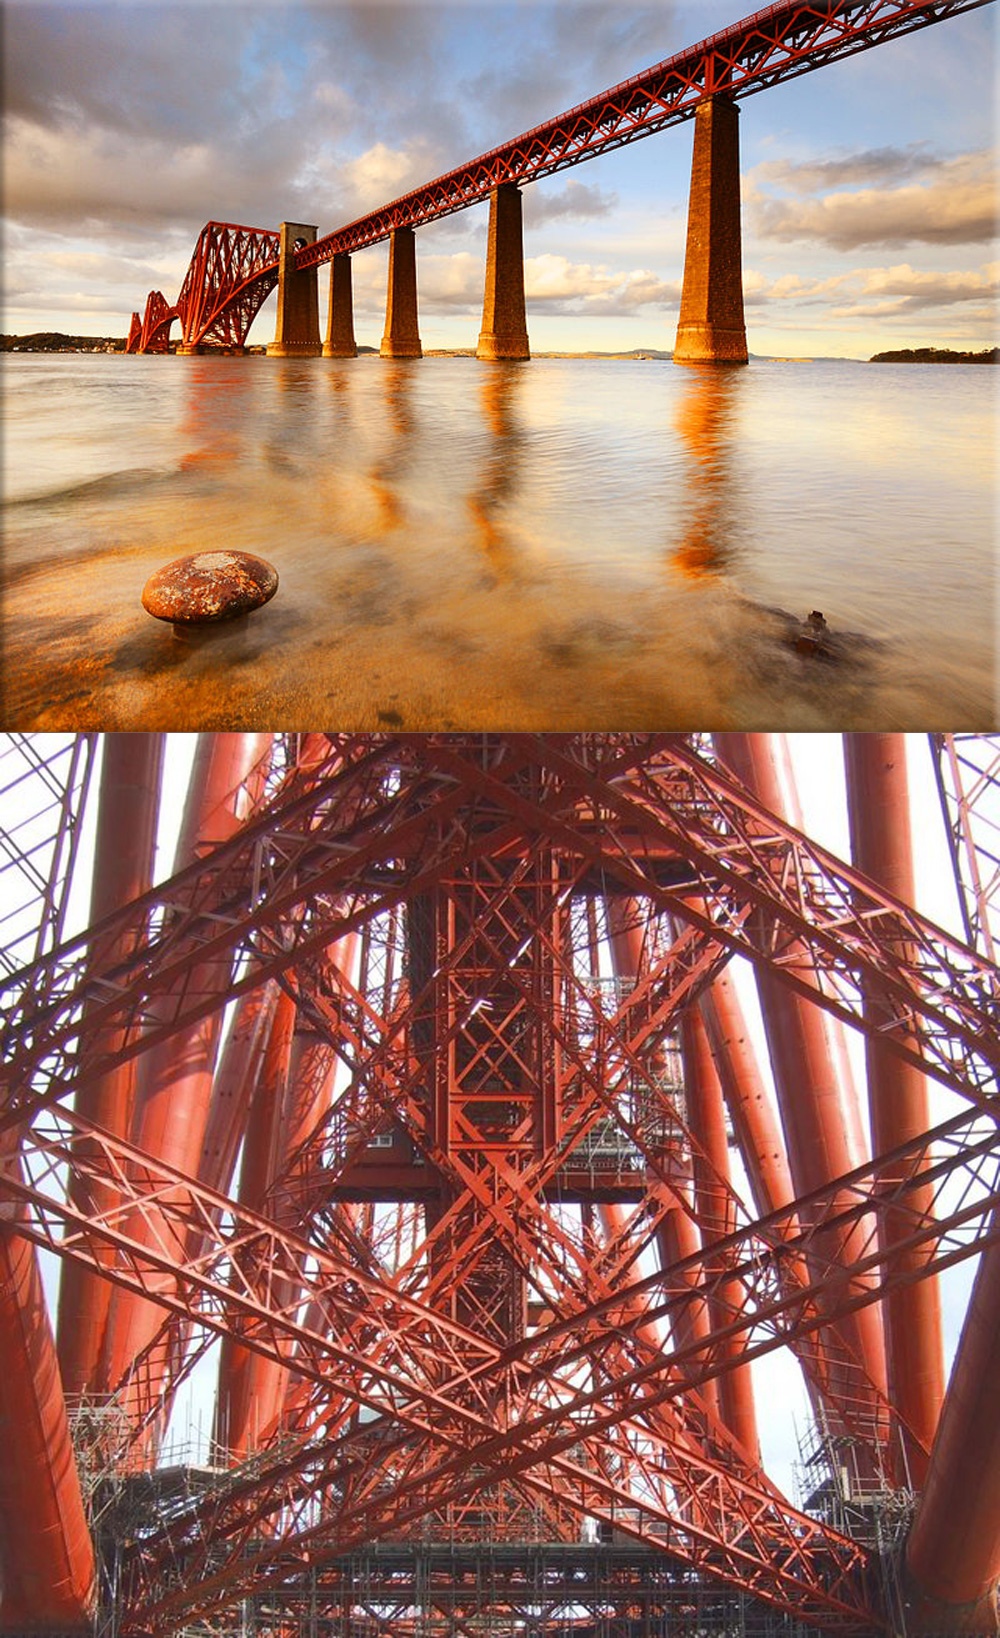 The Forth Bridge is a cantilever railway bridge over the Firth of Forth in the east of Scotland, to the east of the Forth Road Bridge, and 14 kilometres (9 mi) west of central Edinburgh